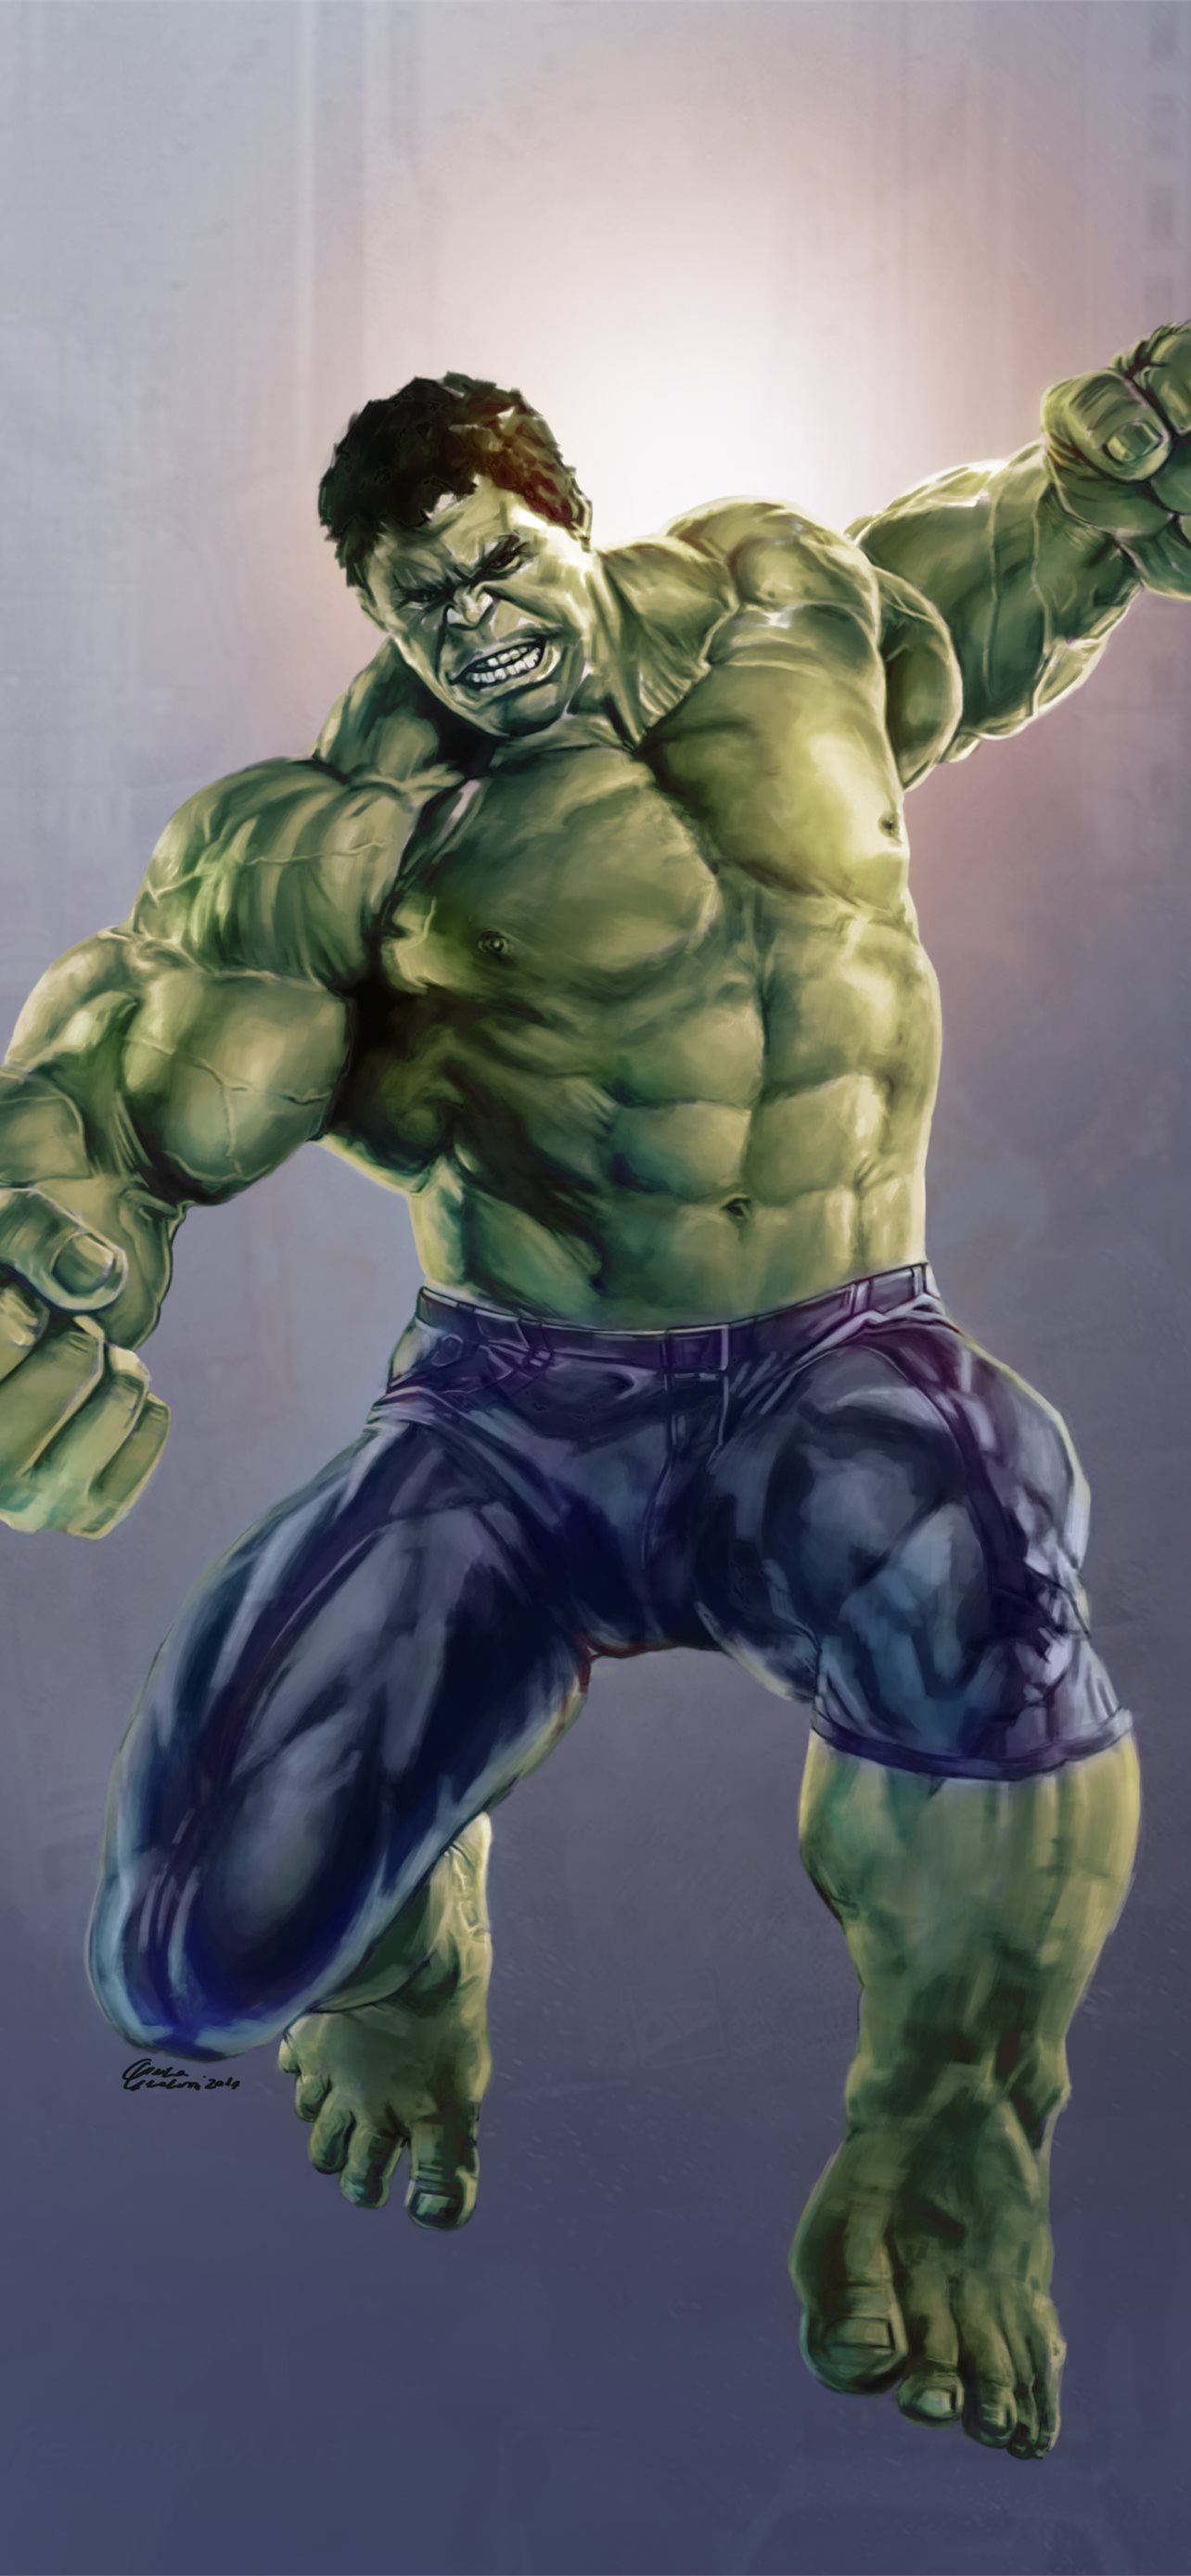 Angry Marvelous Hulk Hues with fire wallpaper for Walls - Magic Decor ®-thanhphatduhoc.com.vn